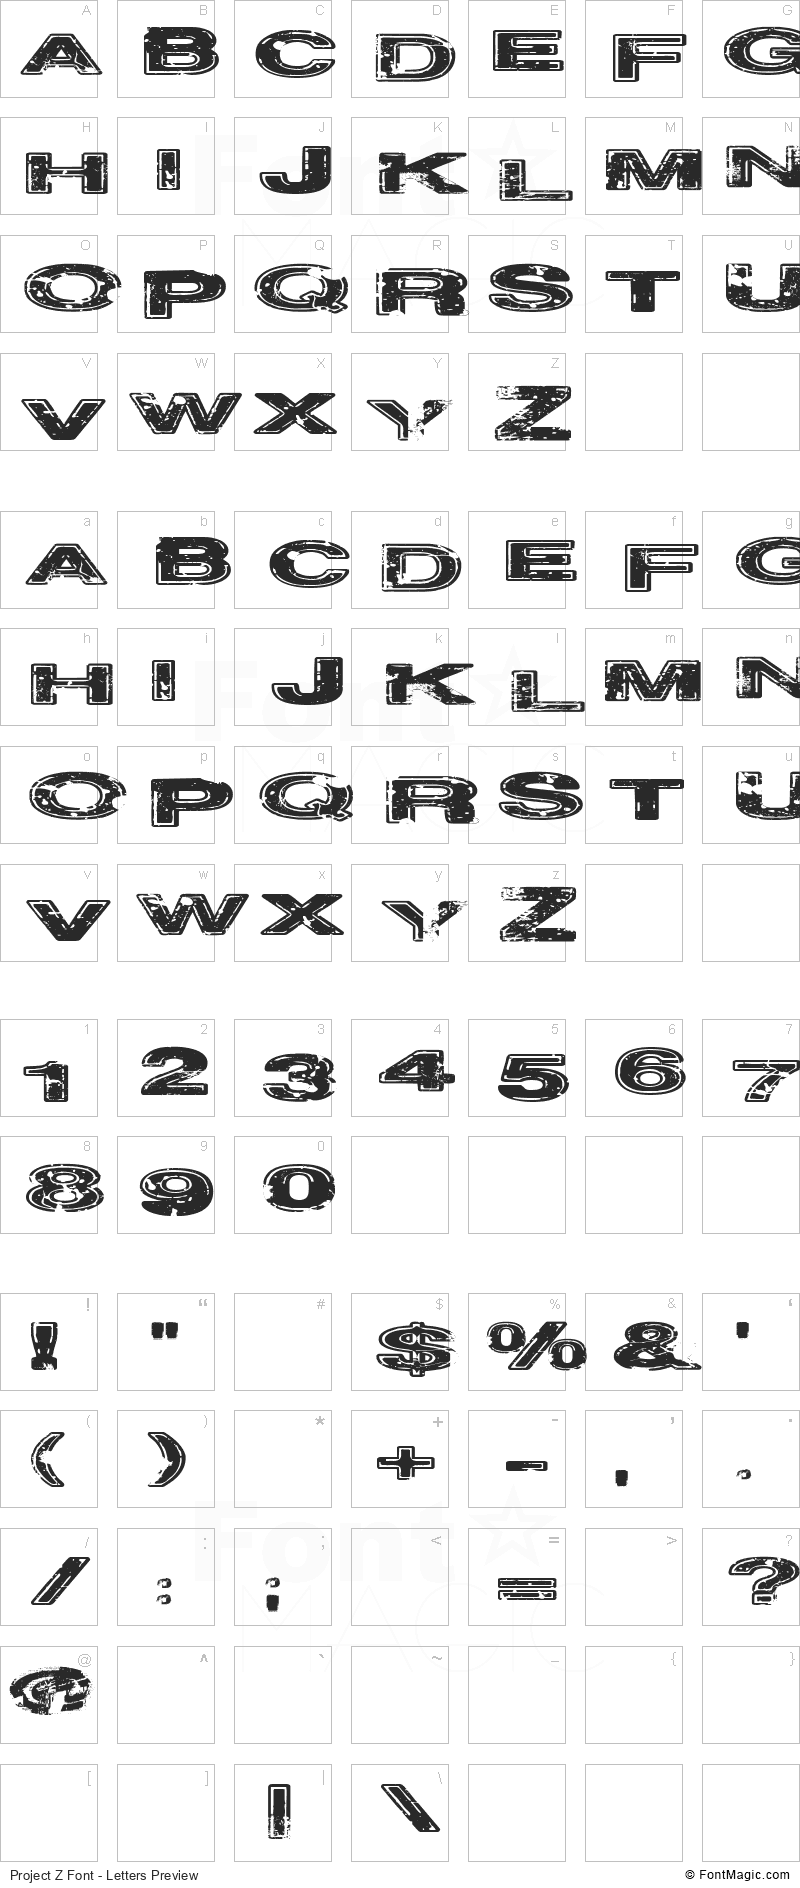 Project Z Font - All Latters Preview Chart